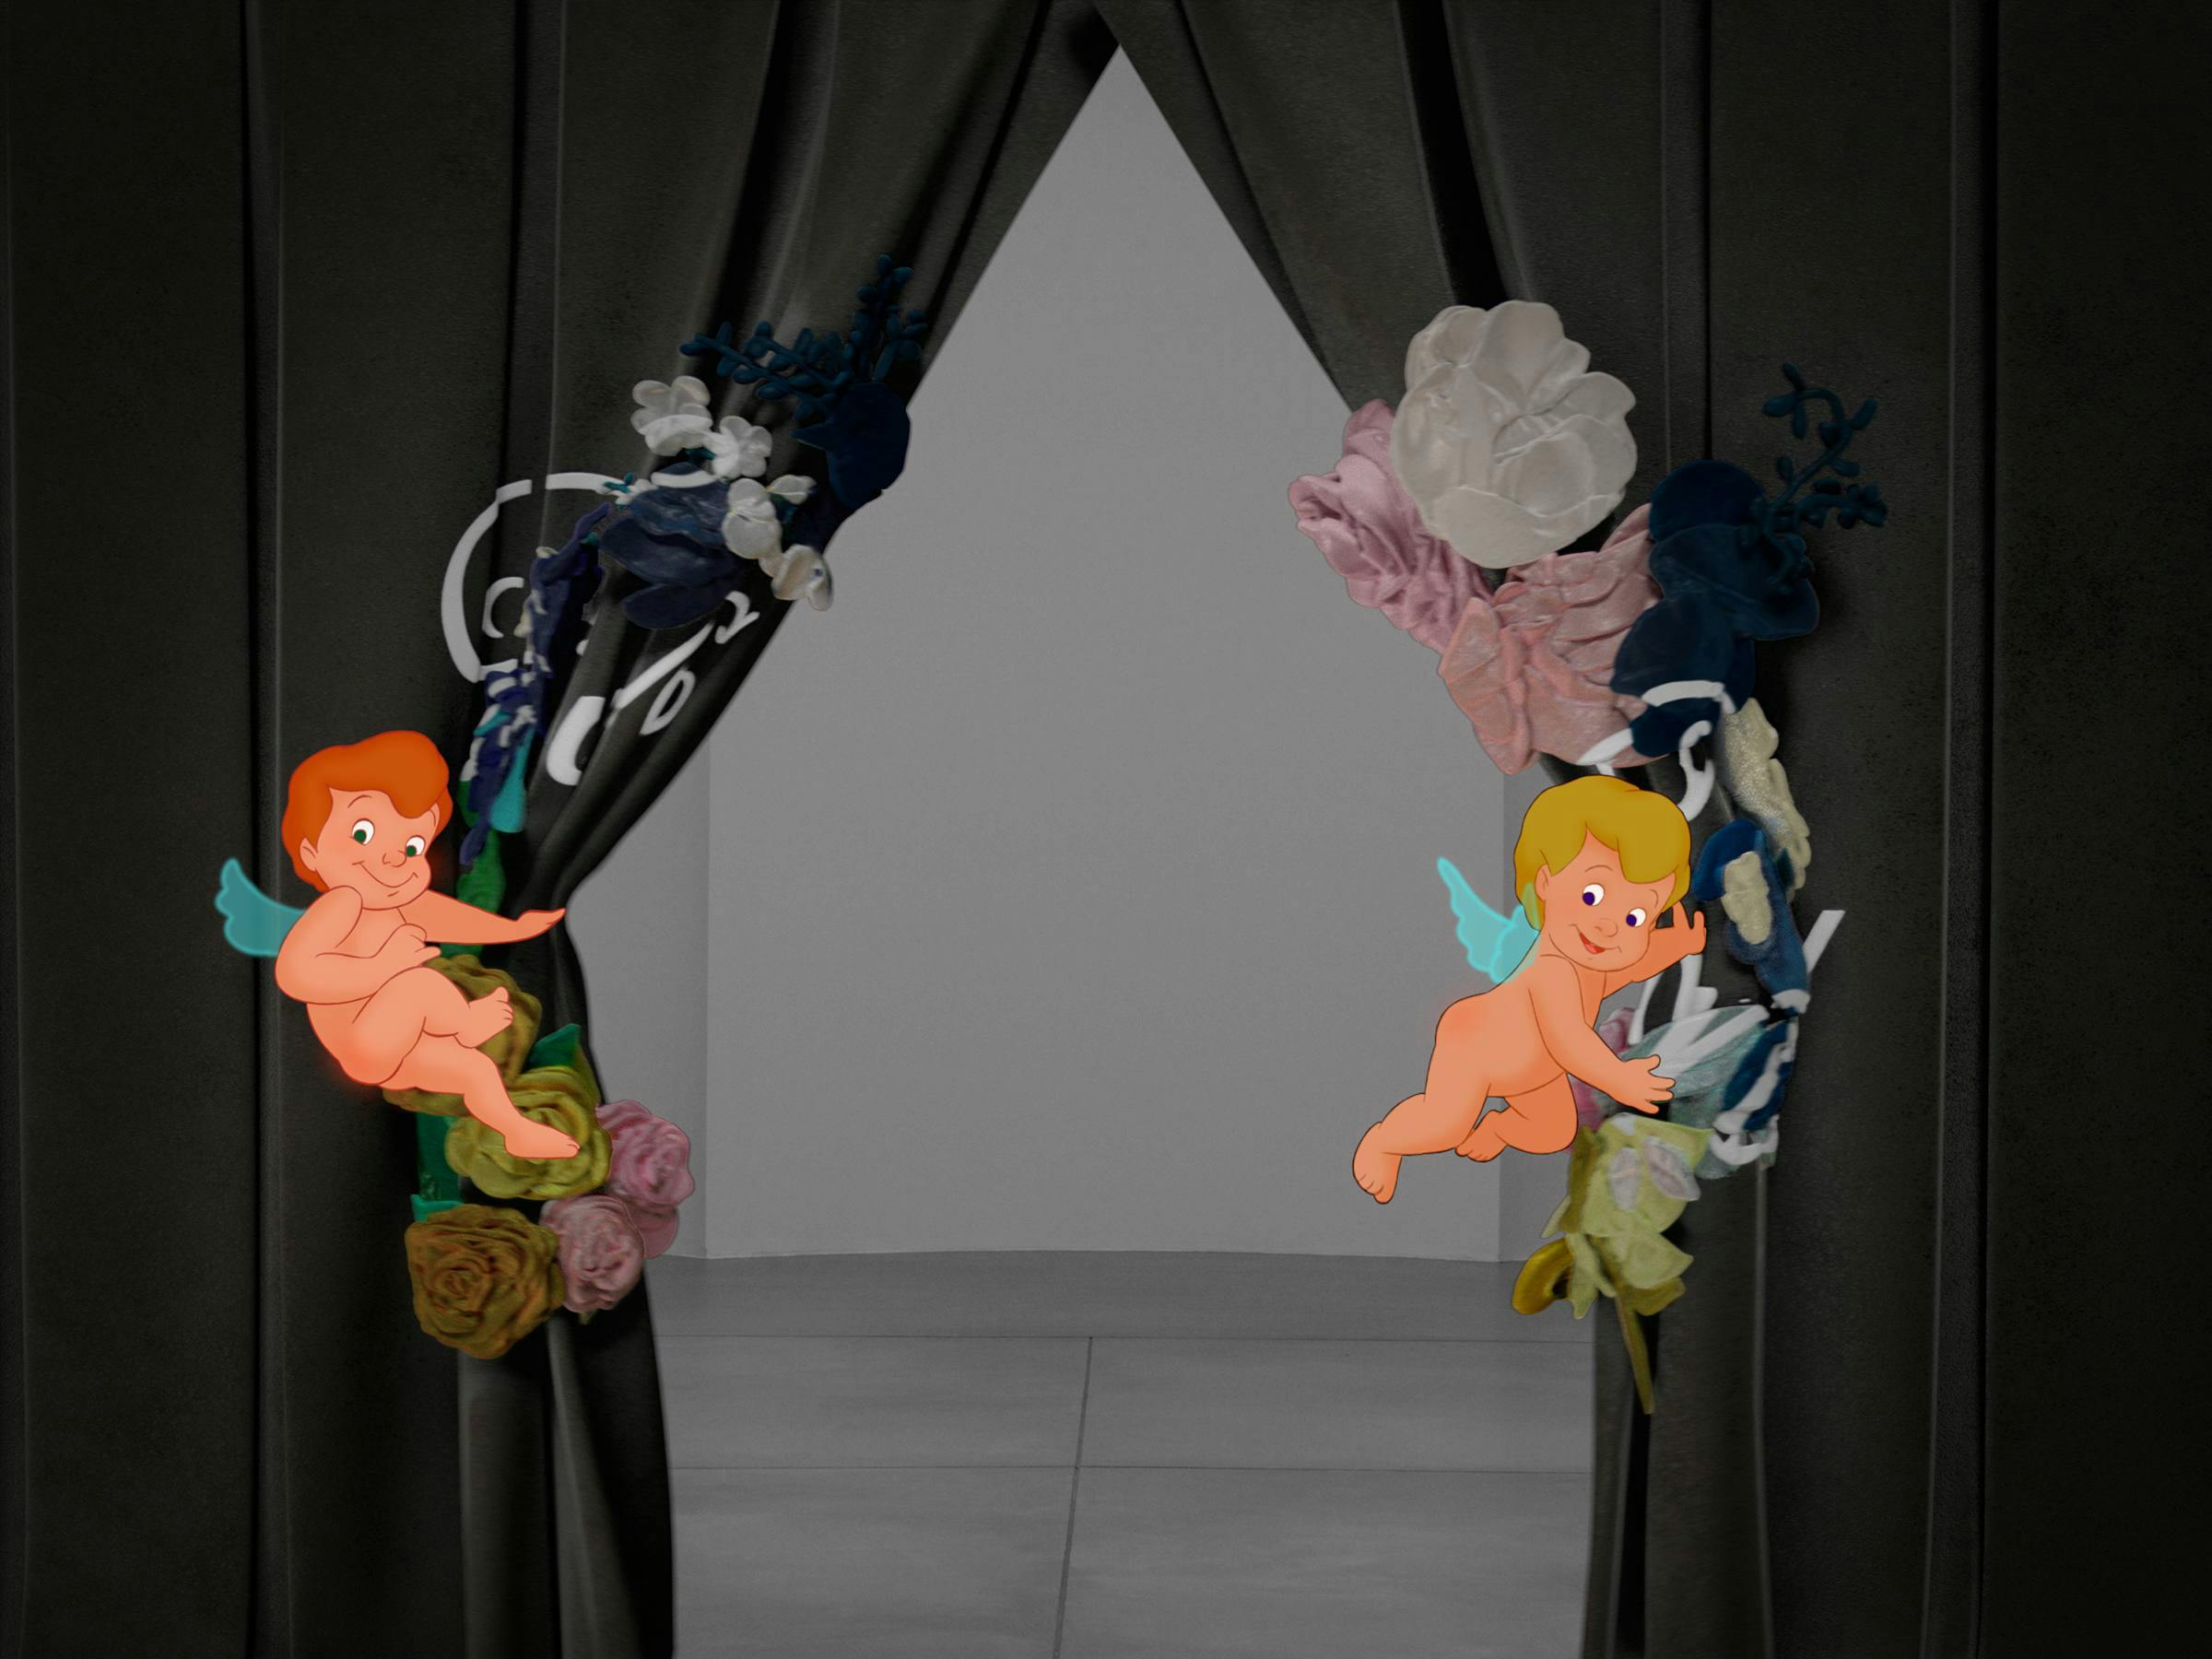 2 animated cherubs hold open a grey curtain to reveal an empty gallery space.